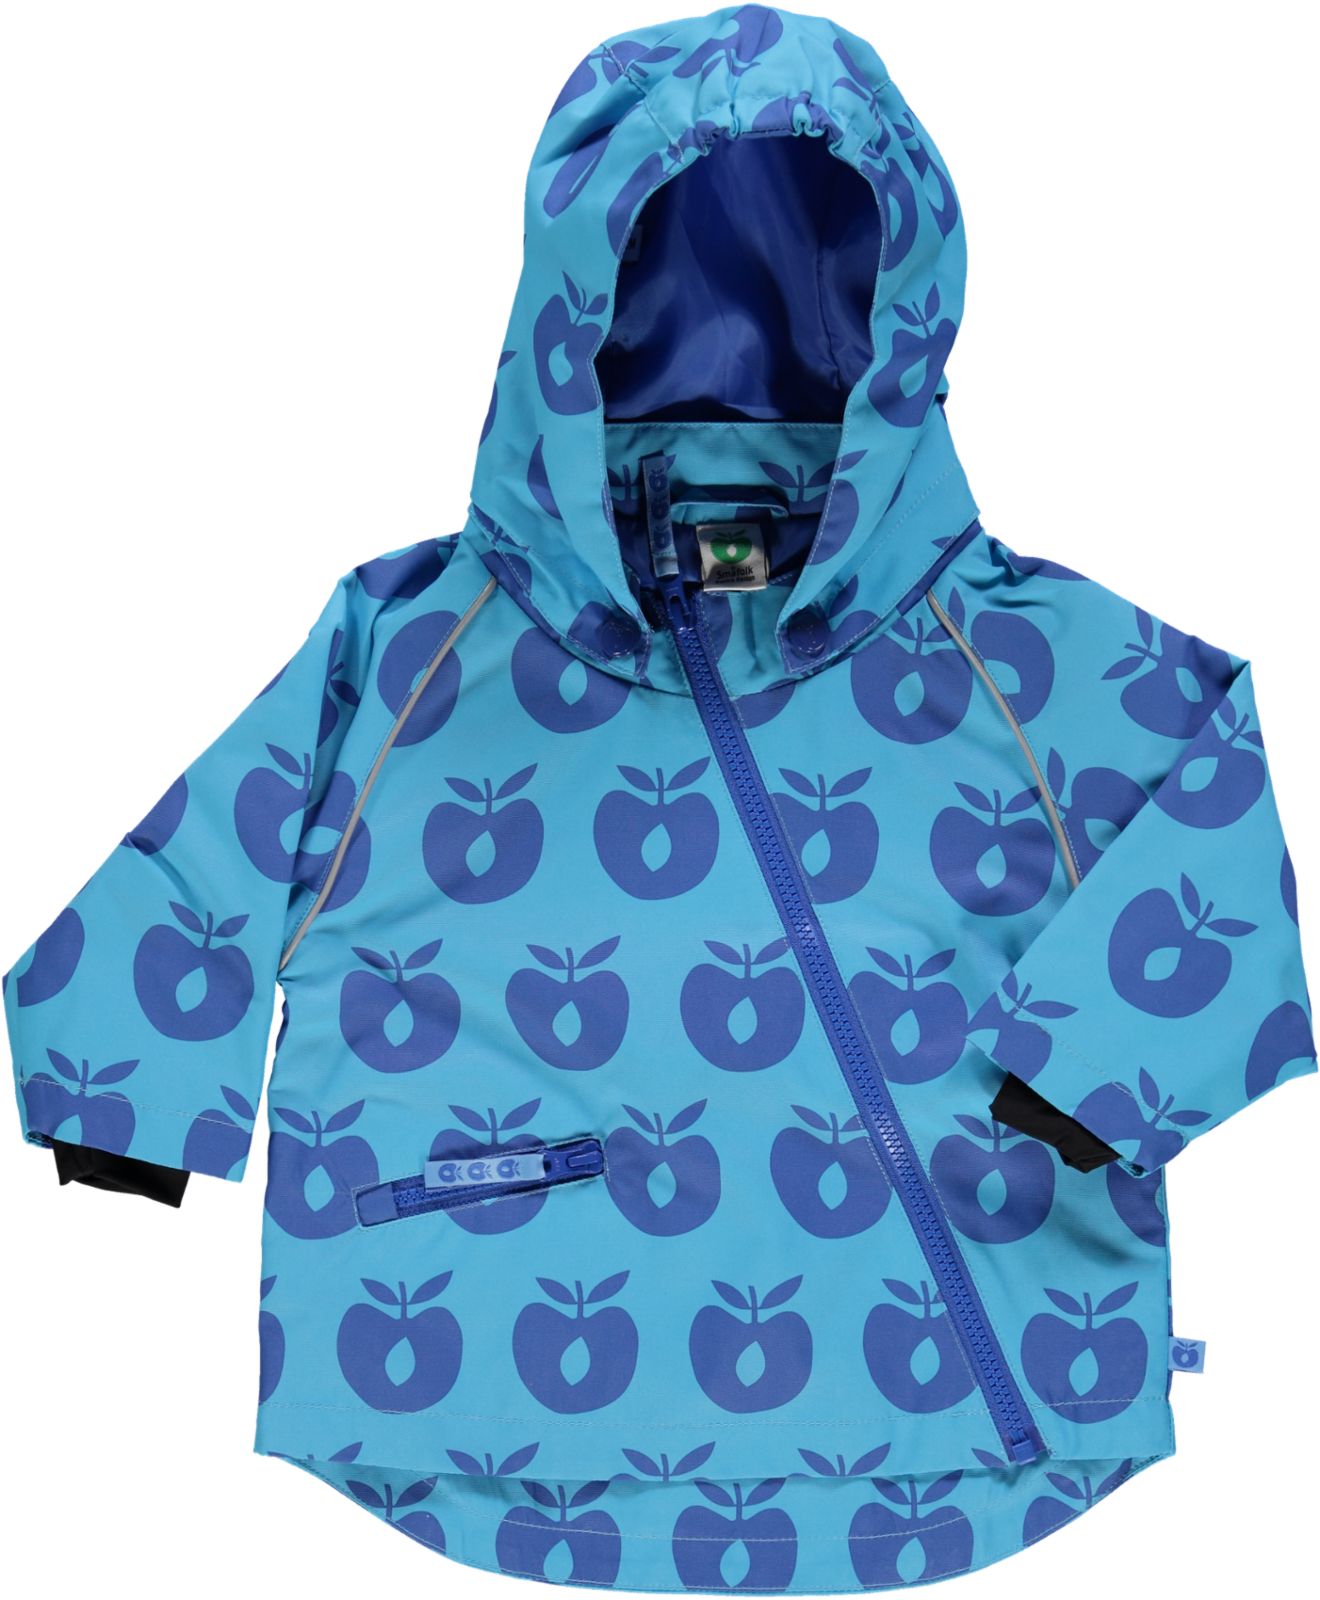 Baby jacket with apples